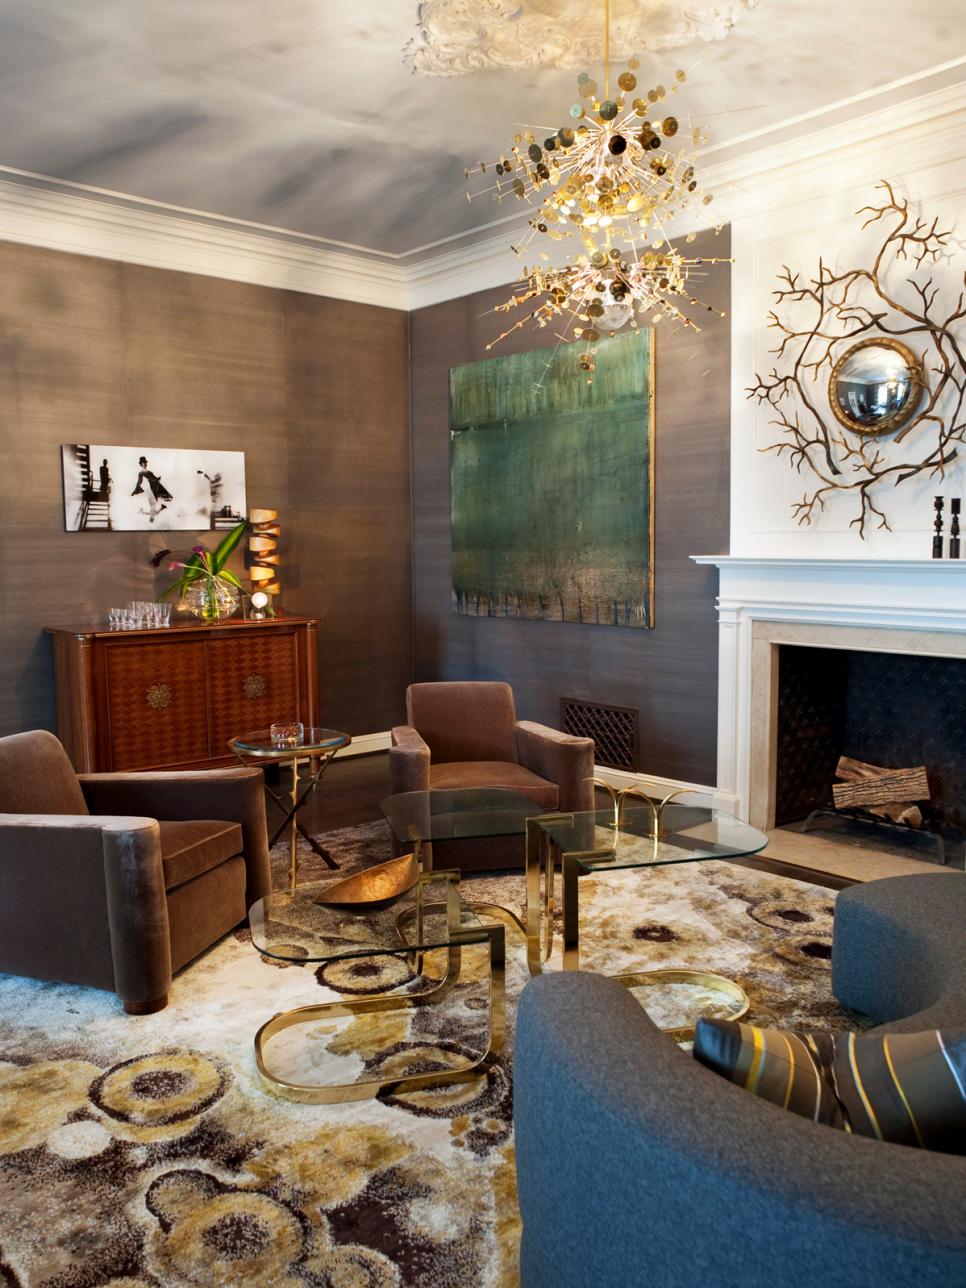 Gold and Gray Living Room With Unique Light Fixture and Wall Art